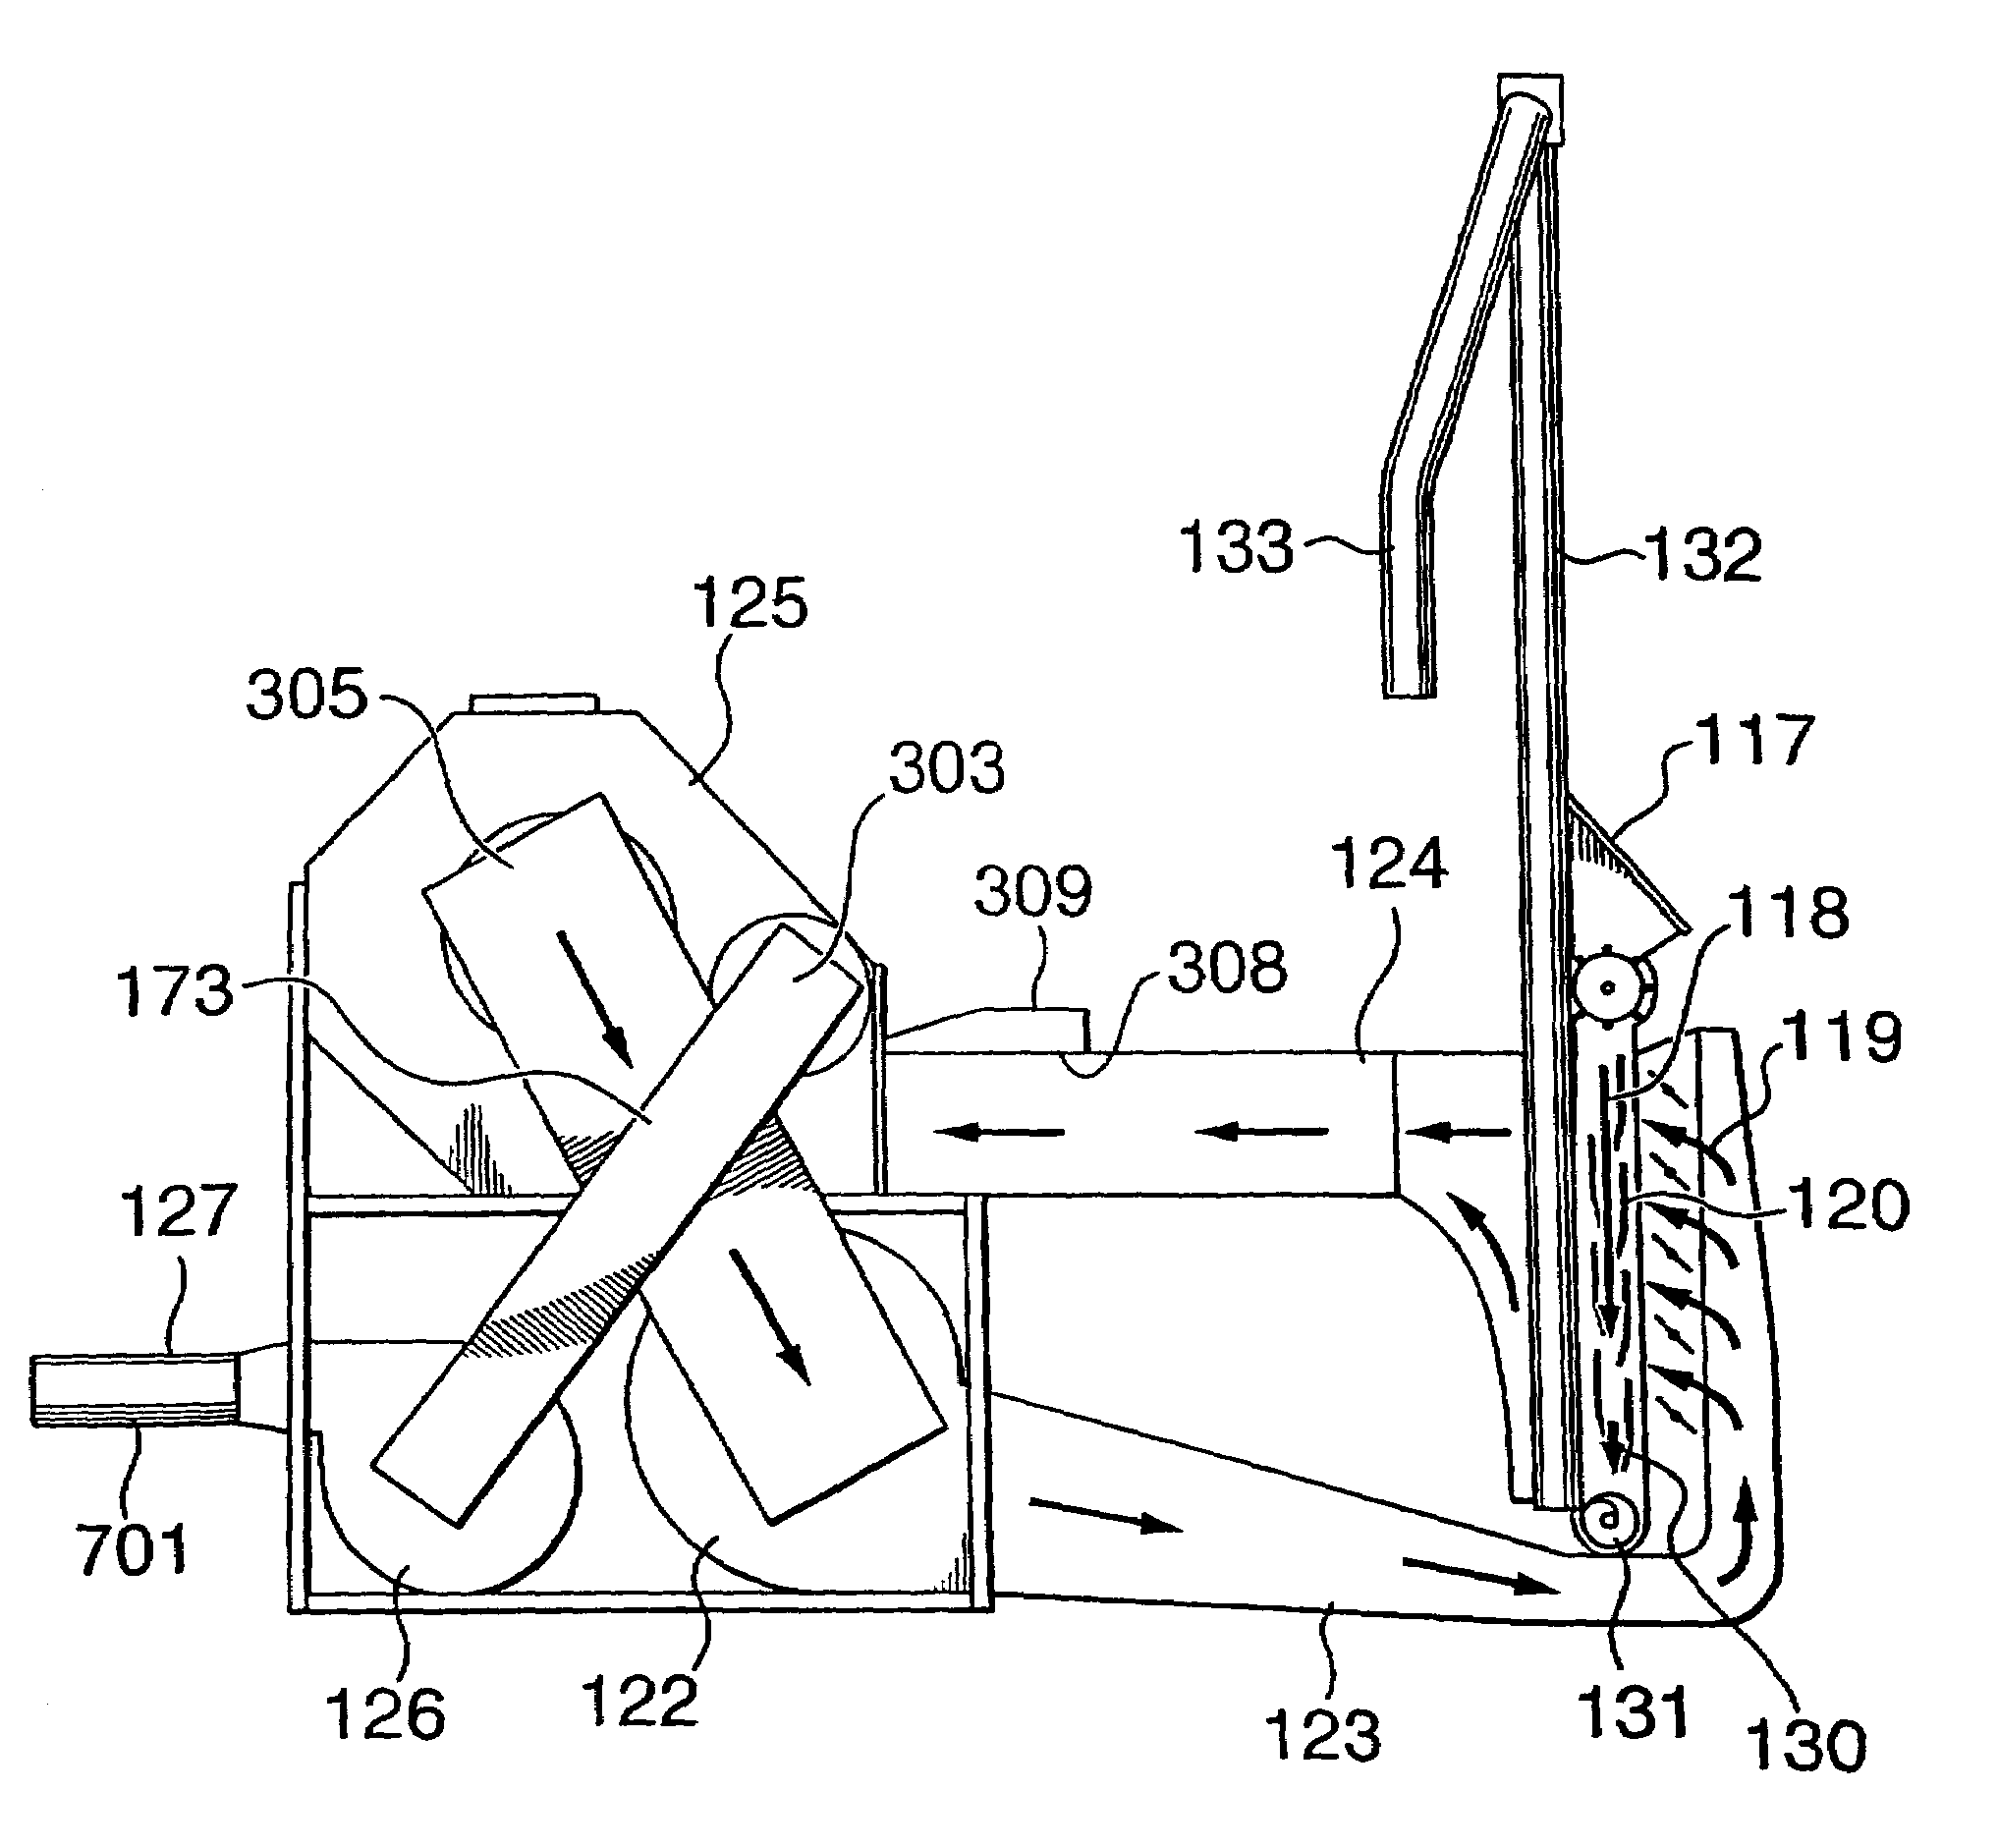 Method and apparatus for harvesting crops